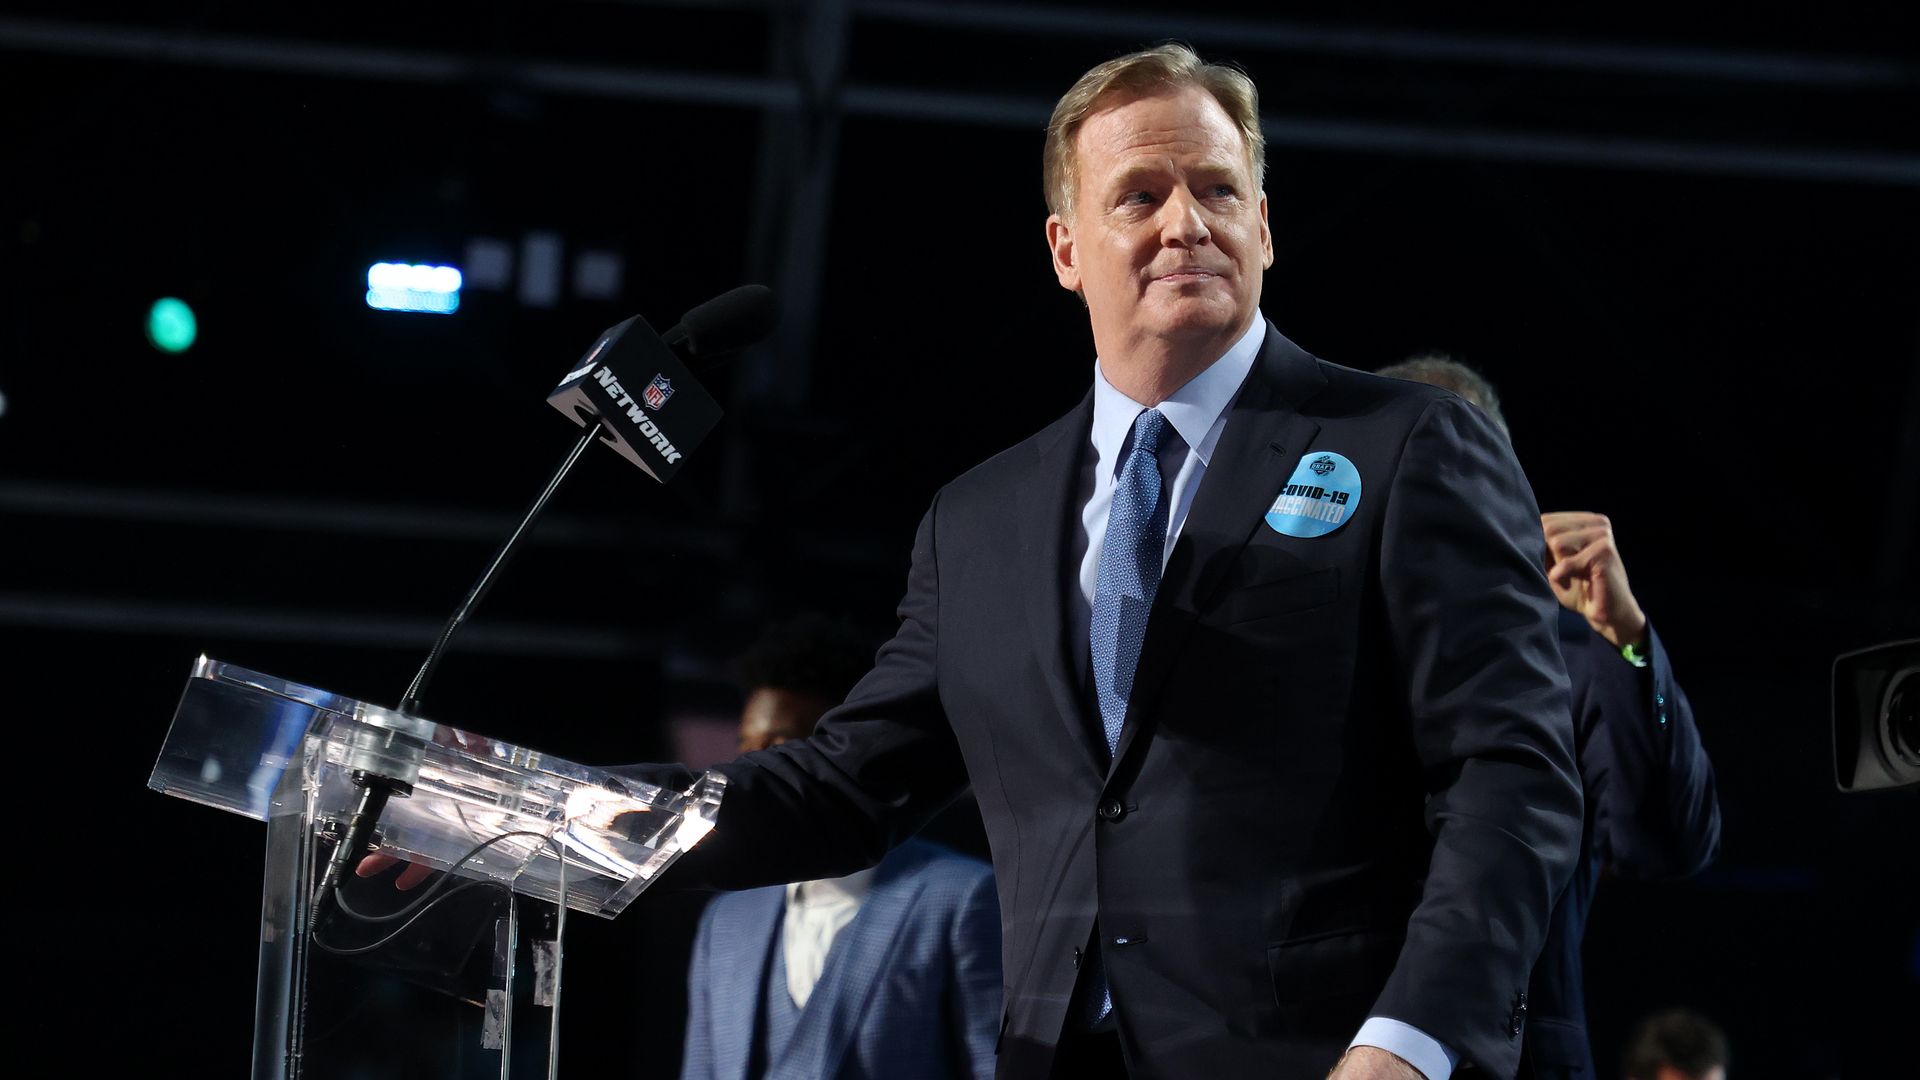 NFL Commissioner Roger Goodell at the 2021 NFL Draft in Cleveland, Ohio, in April.